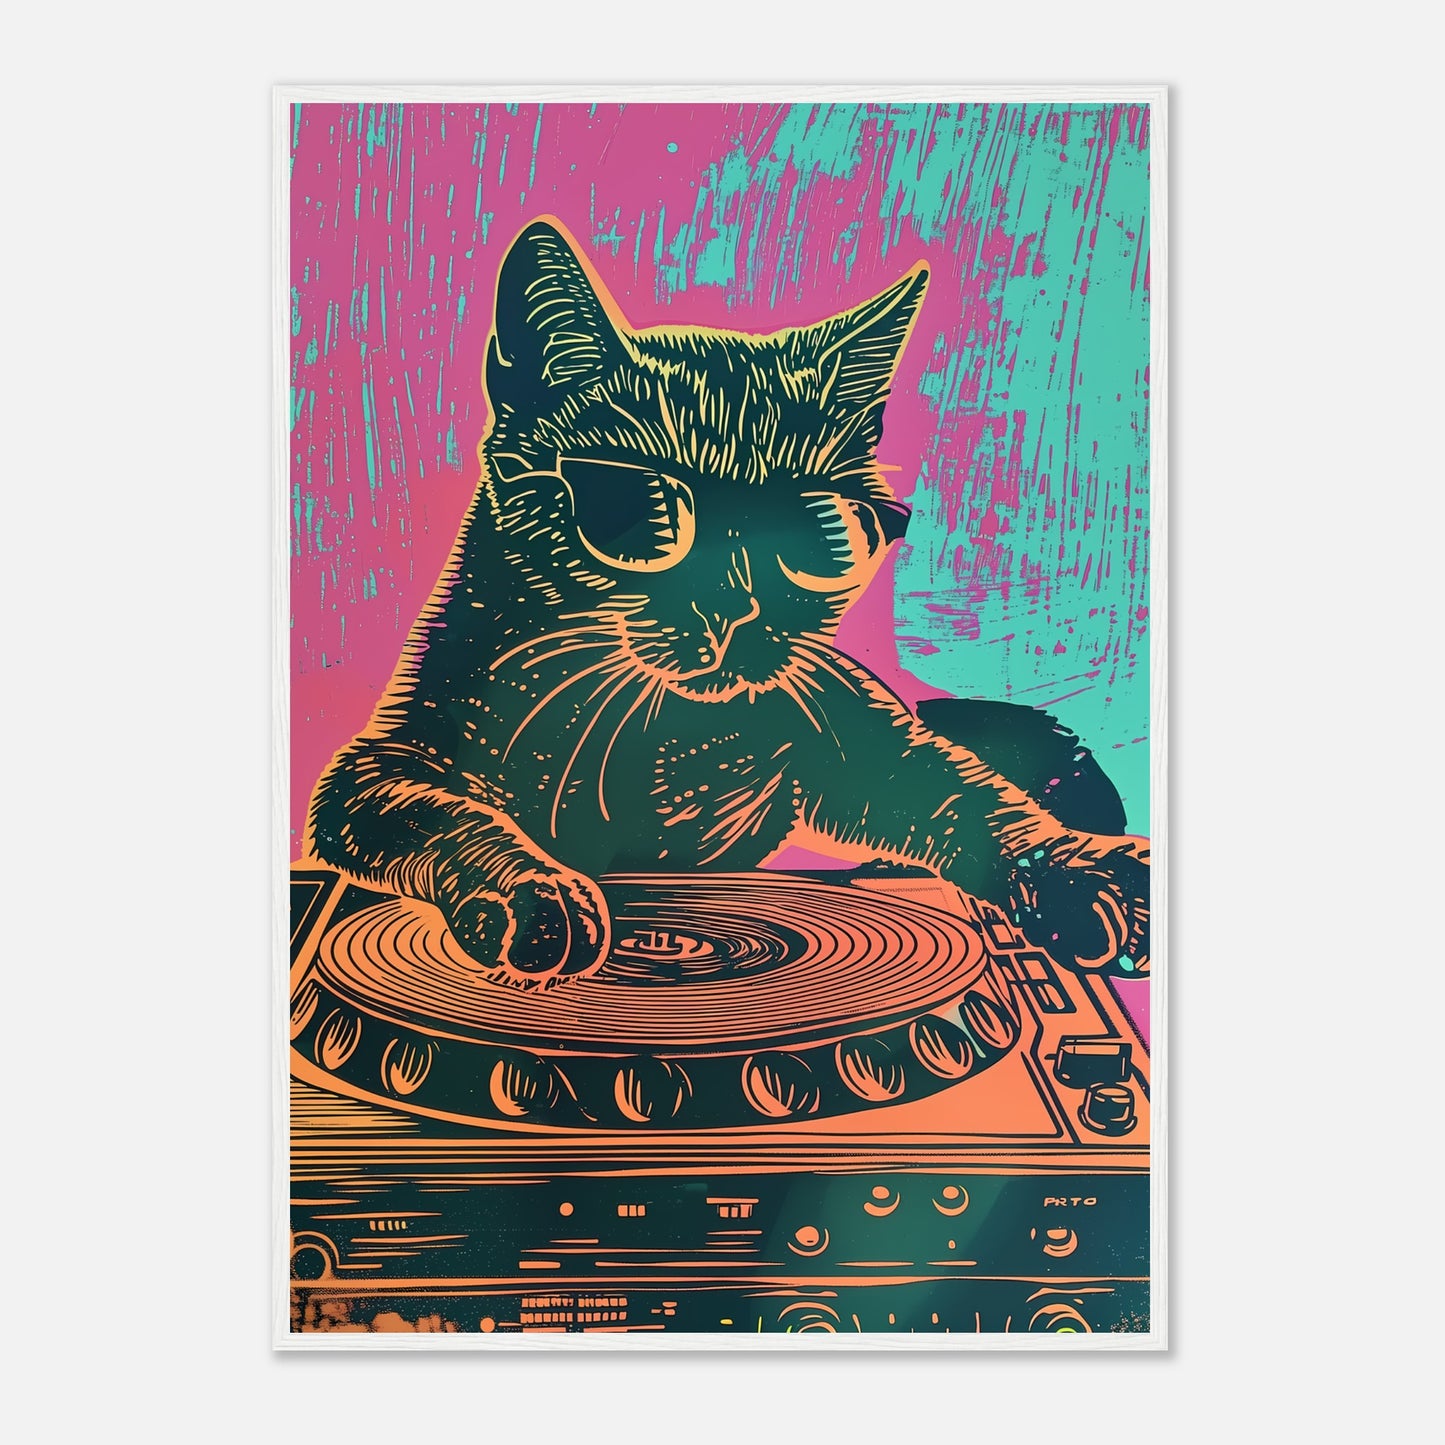 Colorful illustration of a cat DJing on a turntable, framed as artwork.